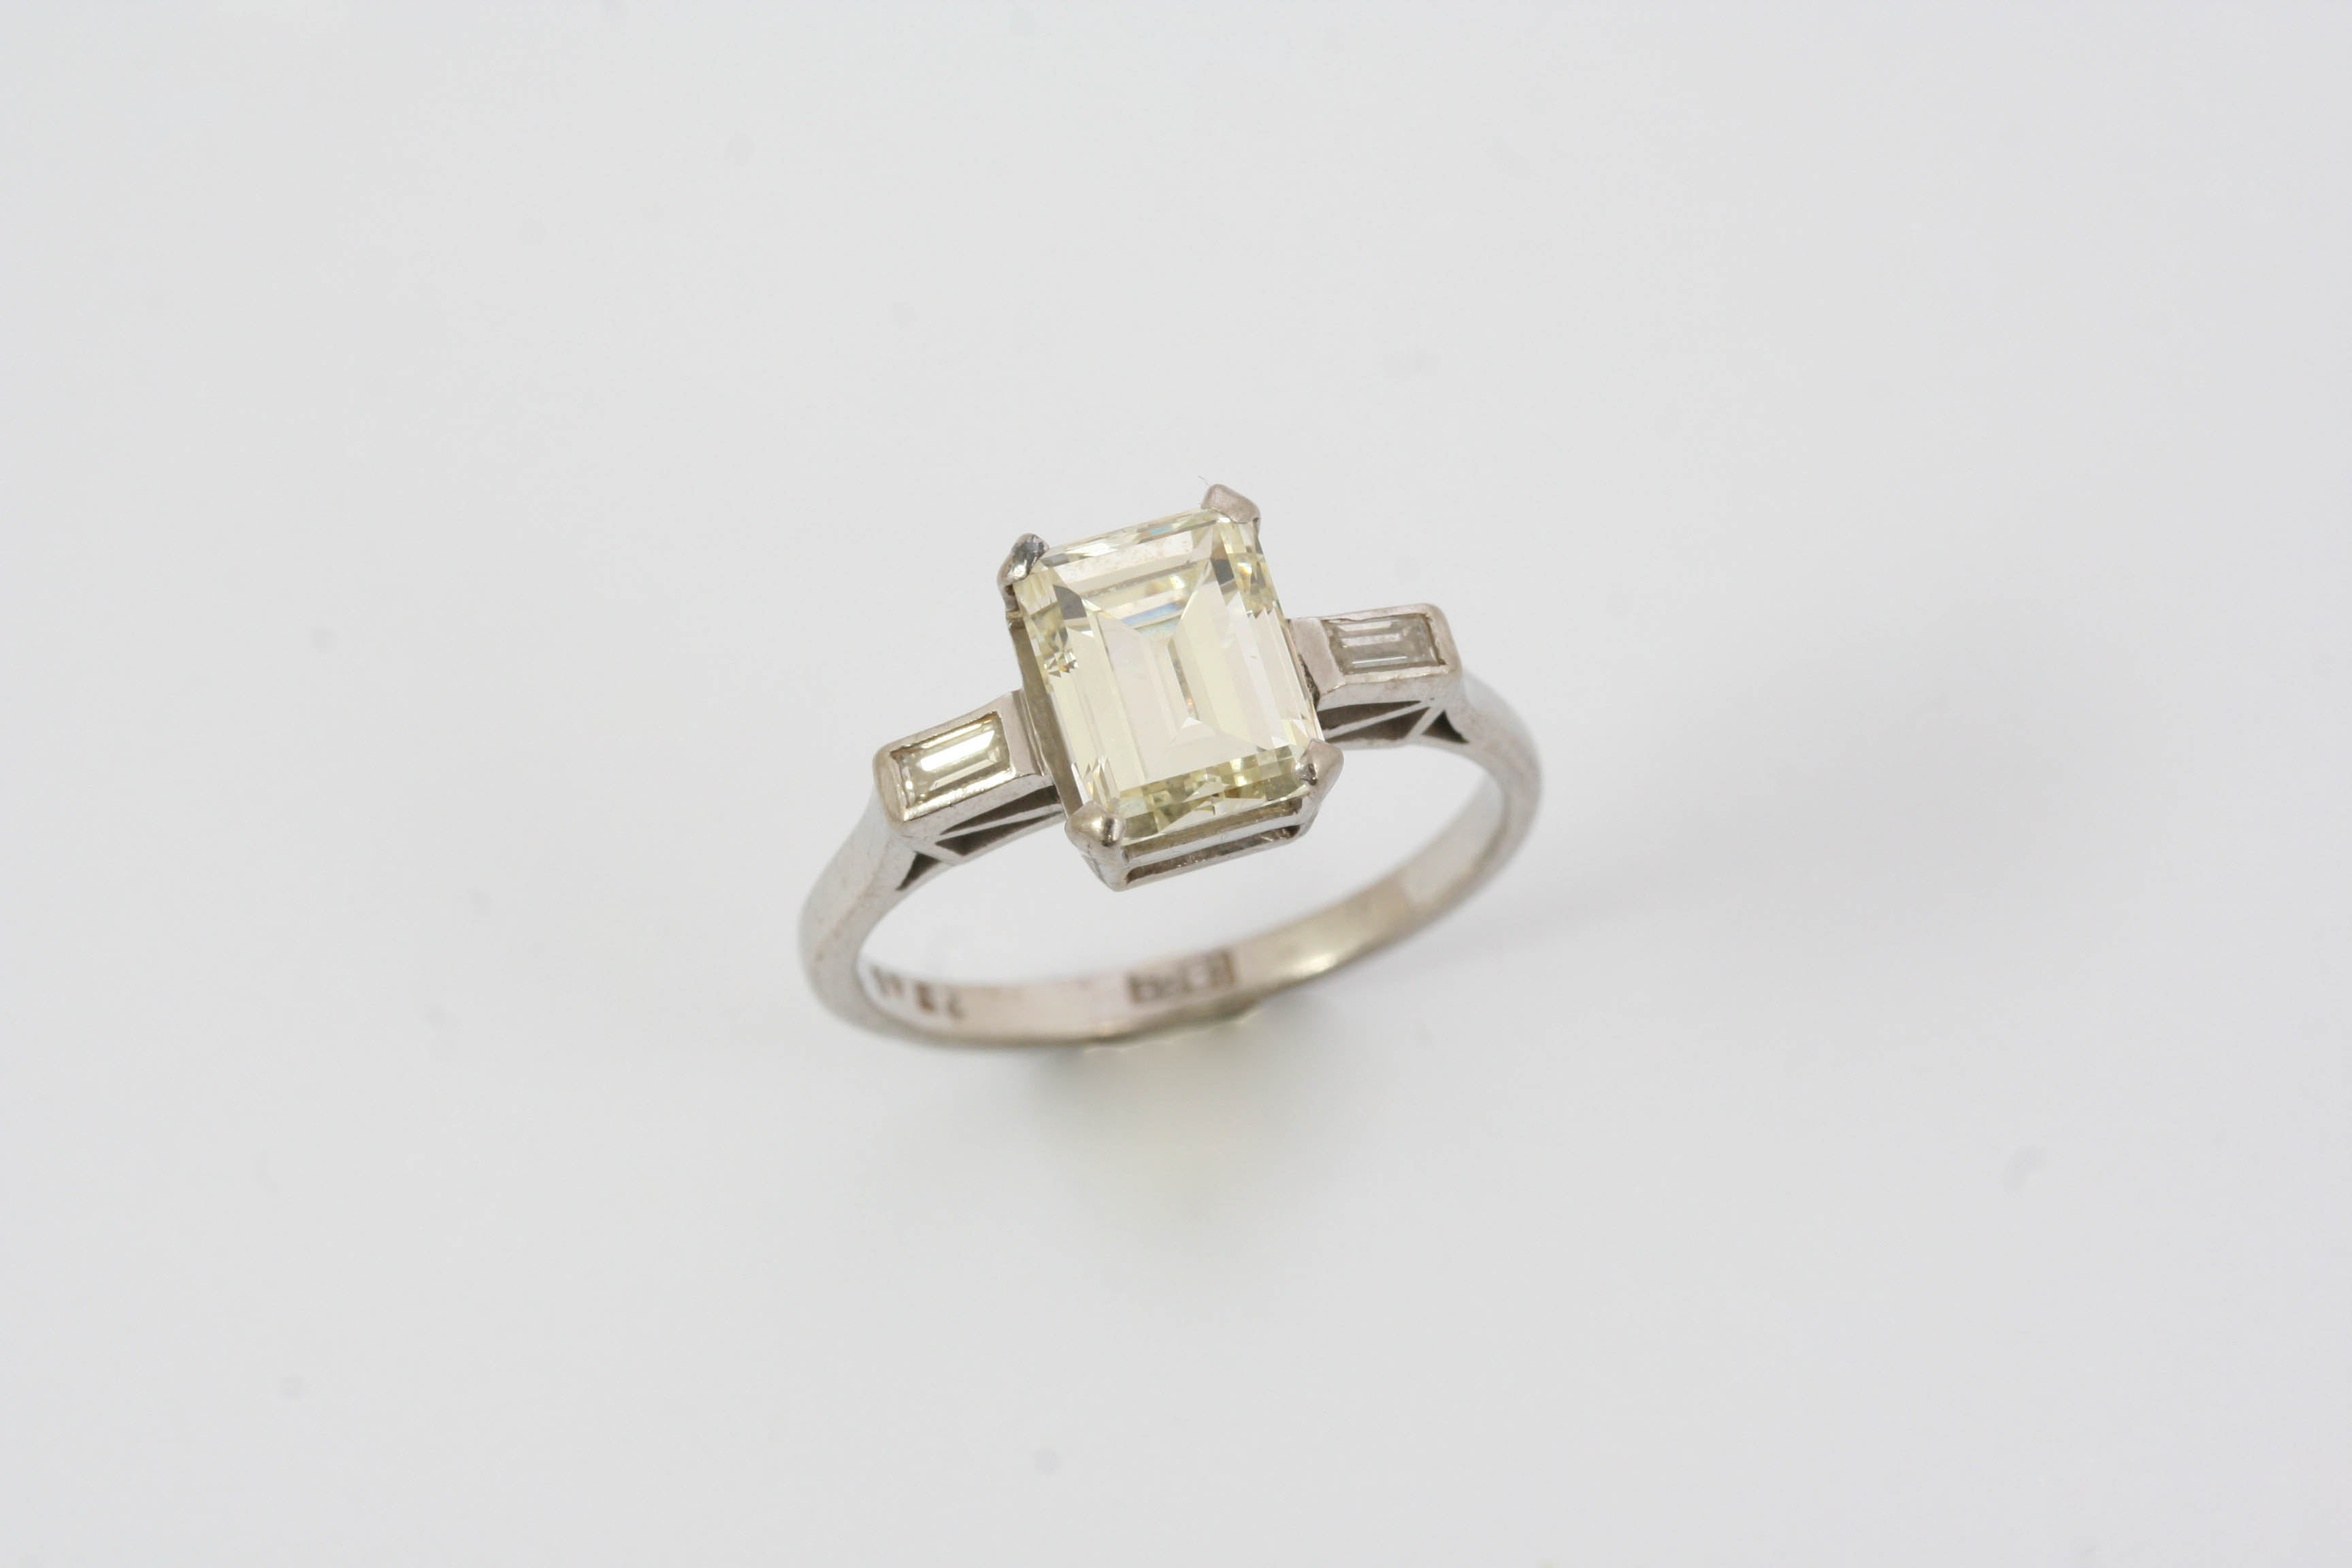 A DIAMOND SOLITAIRE RING the emerald-cut diamond weighs approximately 1.80 carats and is set with